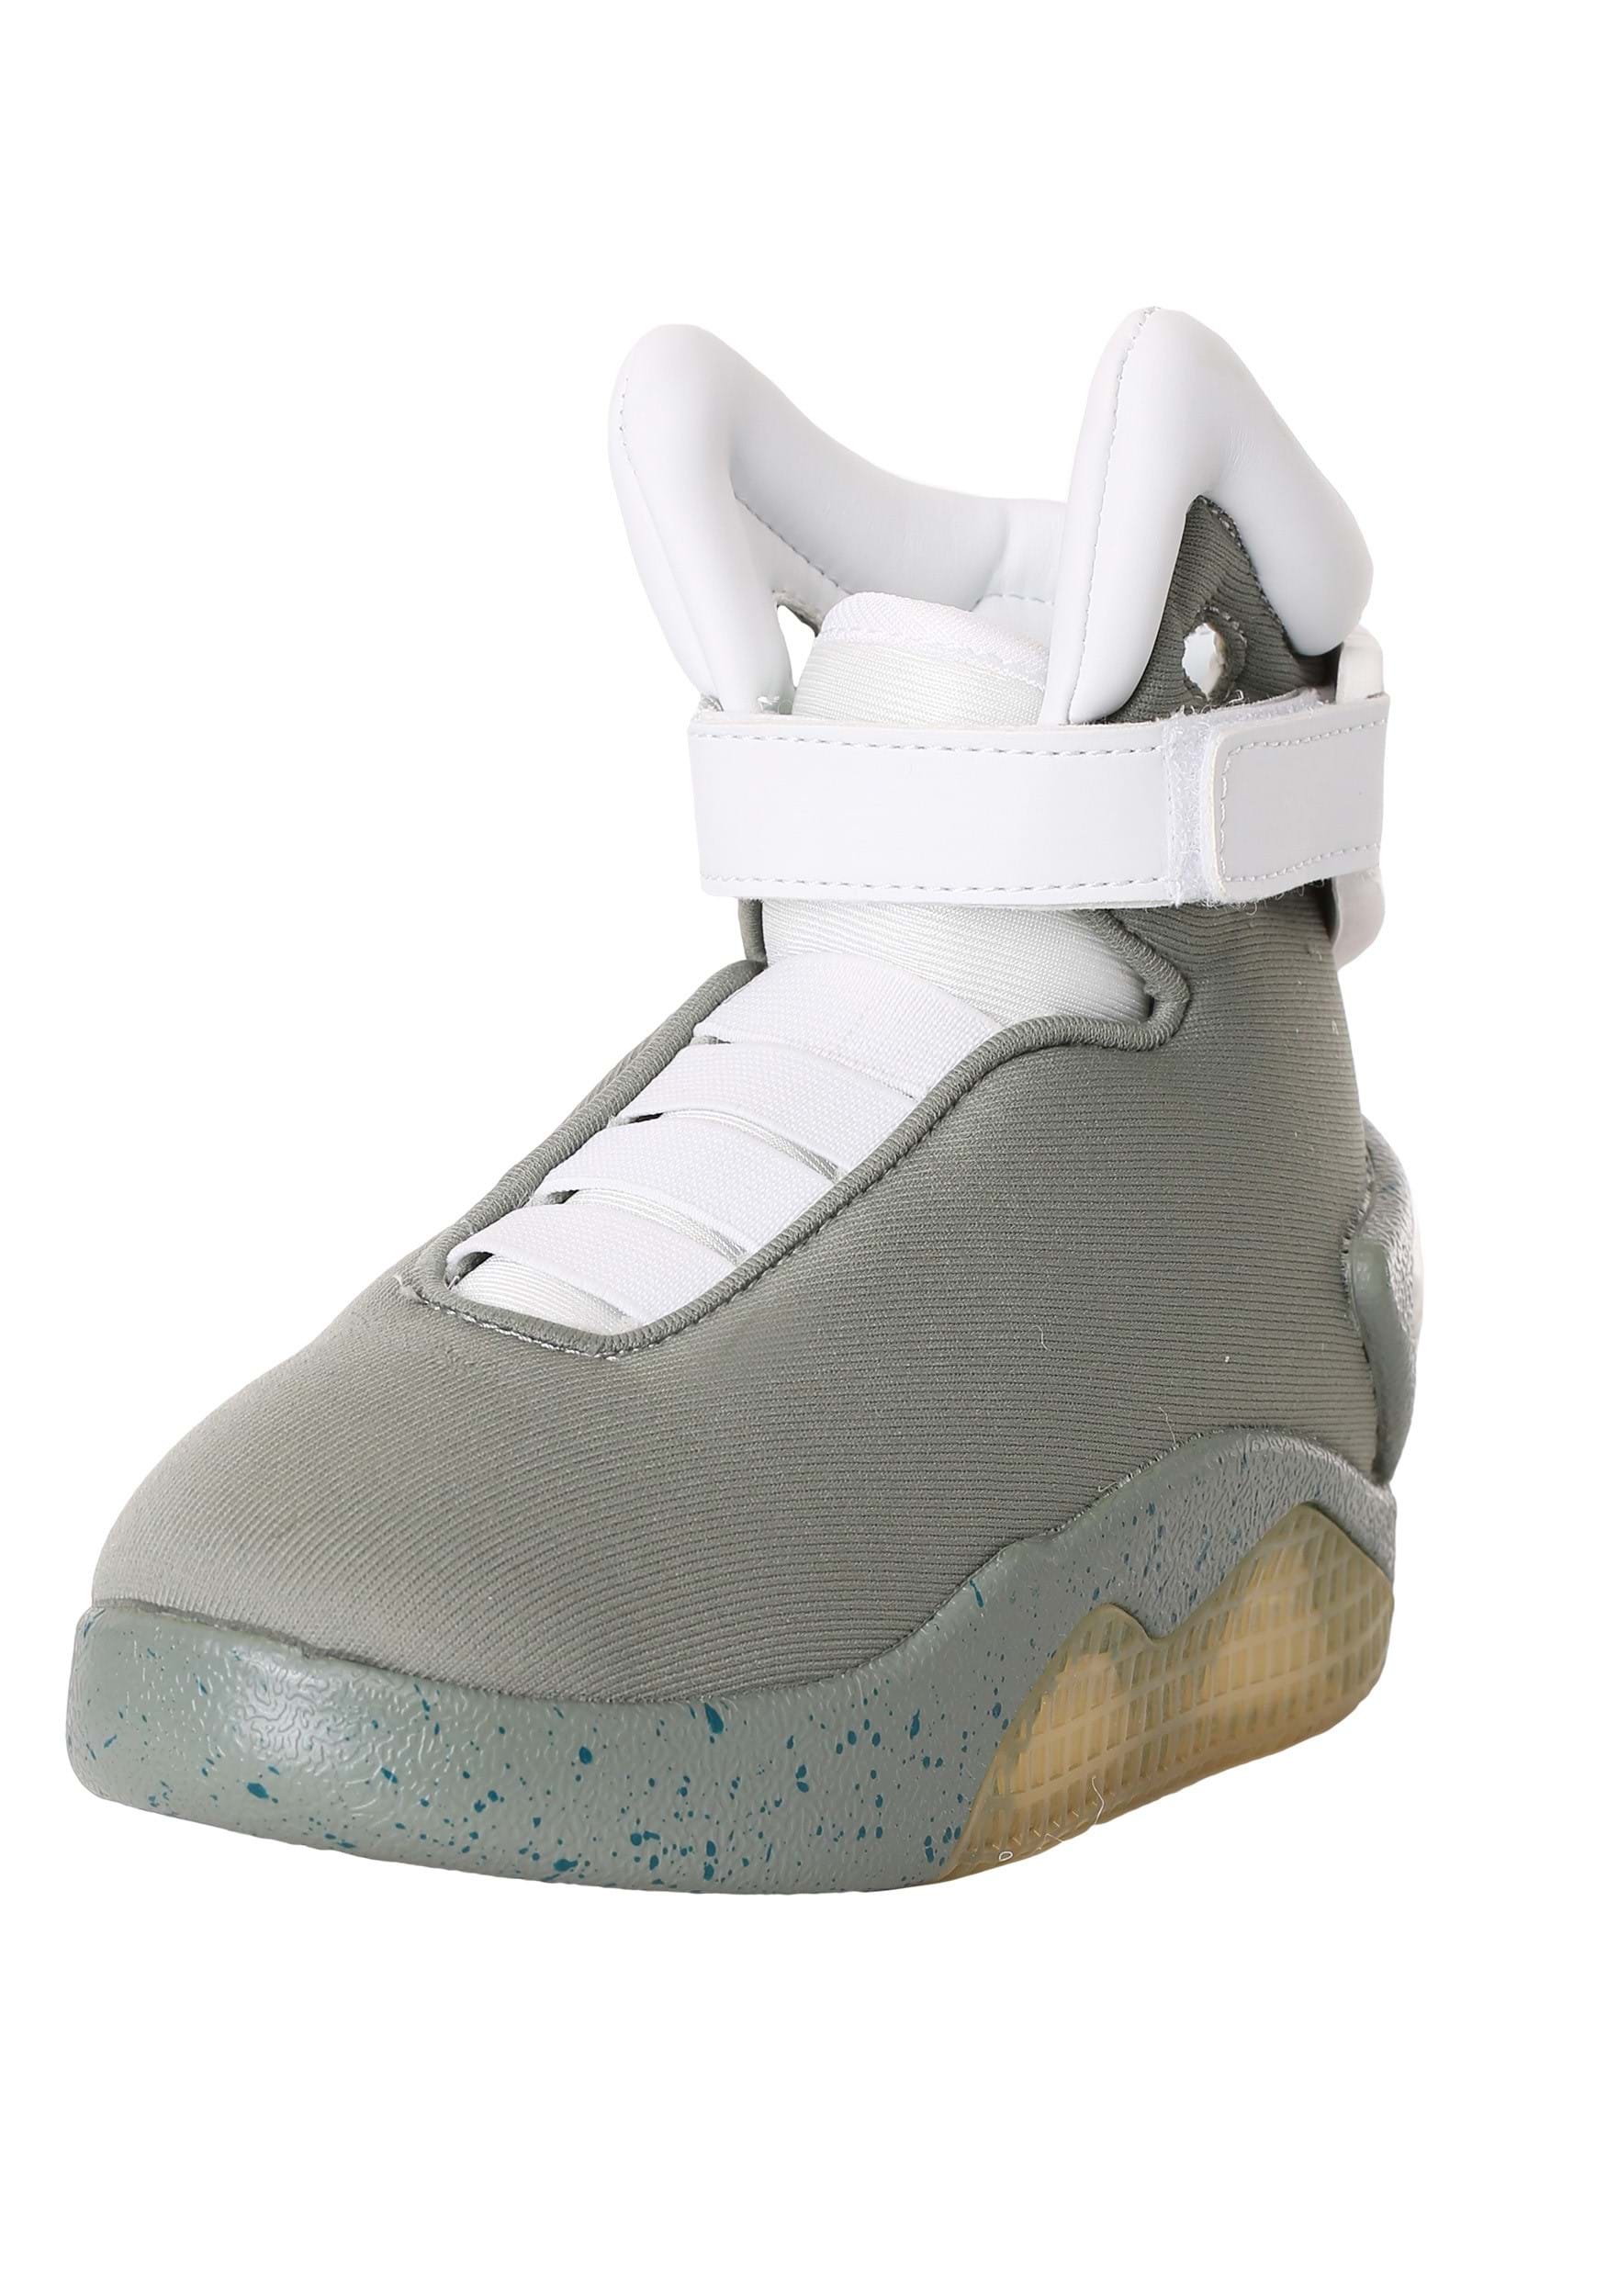 Image of FUN Costumes Light Up Back to the Future Kid's Shoes